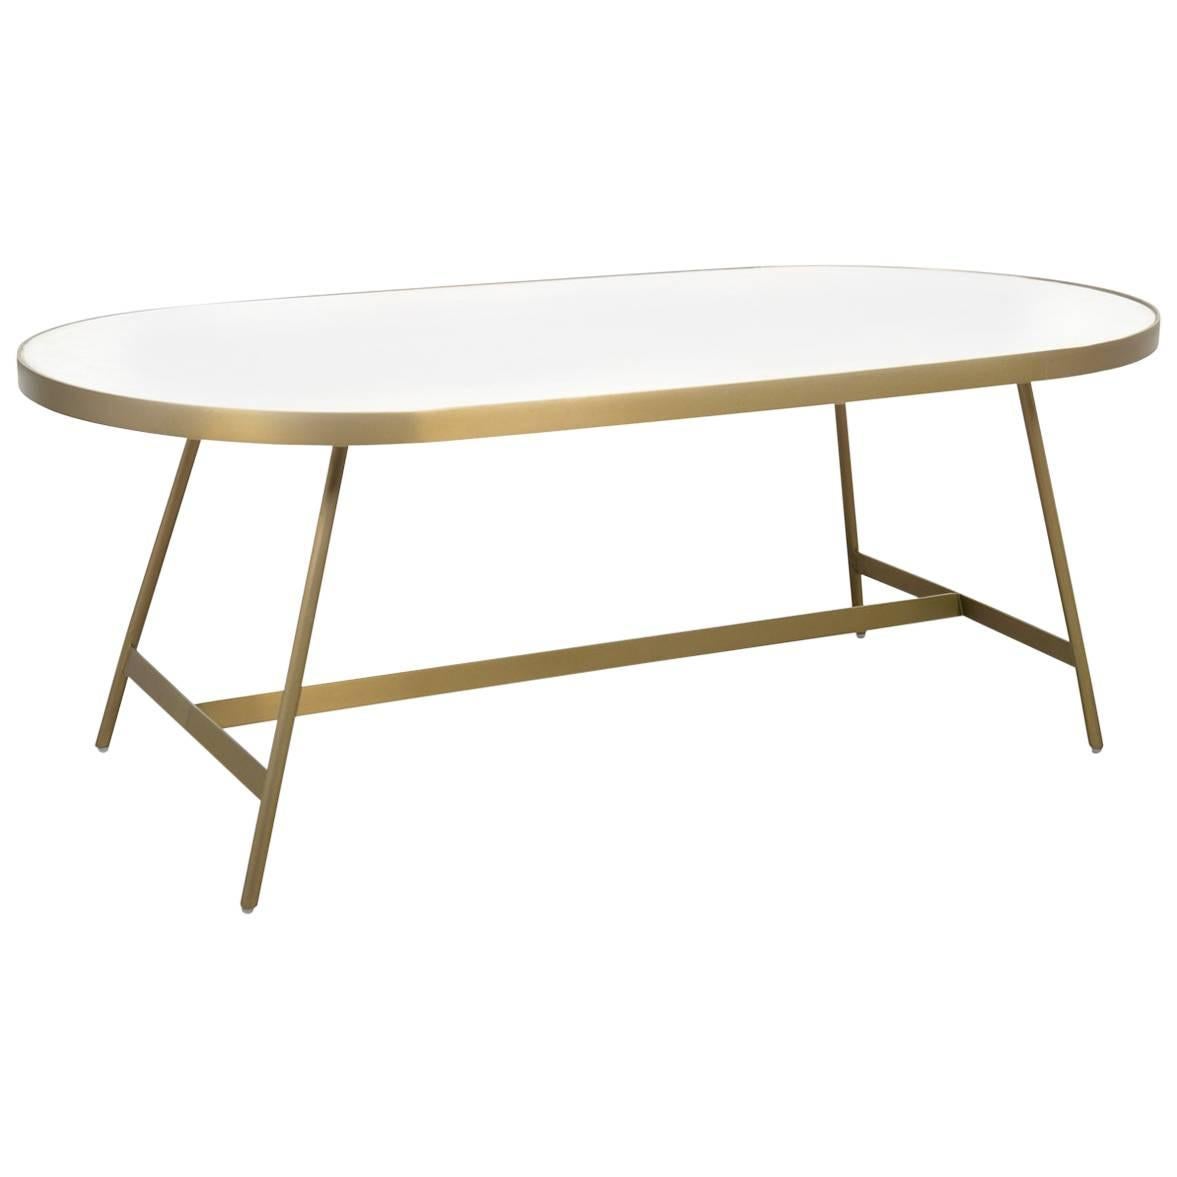 Mid-Century Modern Oval Brushed Brass Coffee Table with Vanilla Concrete Top